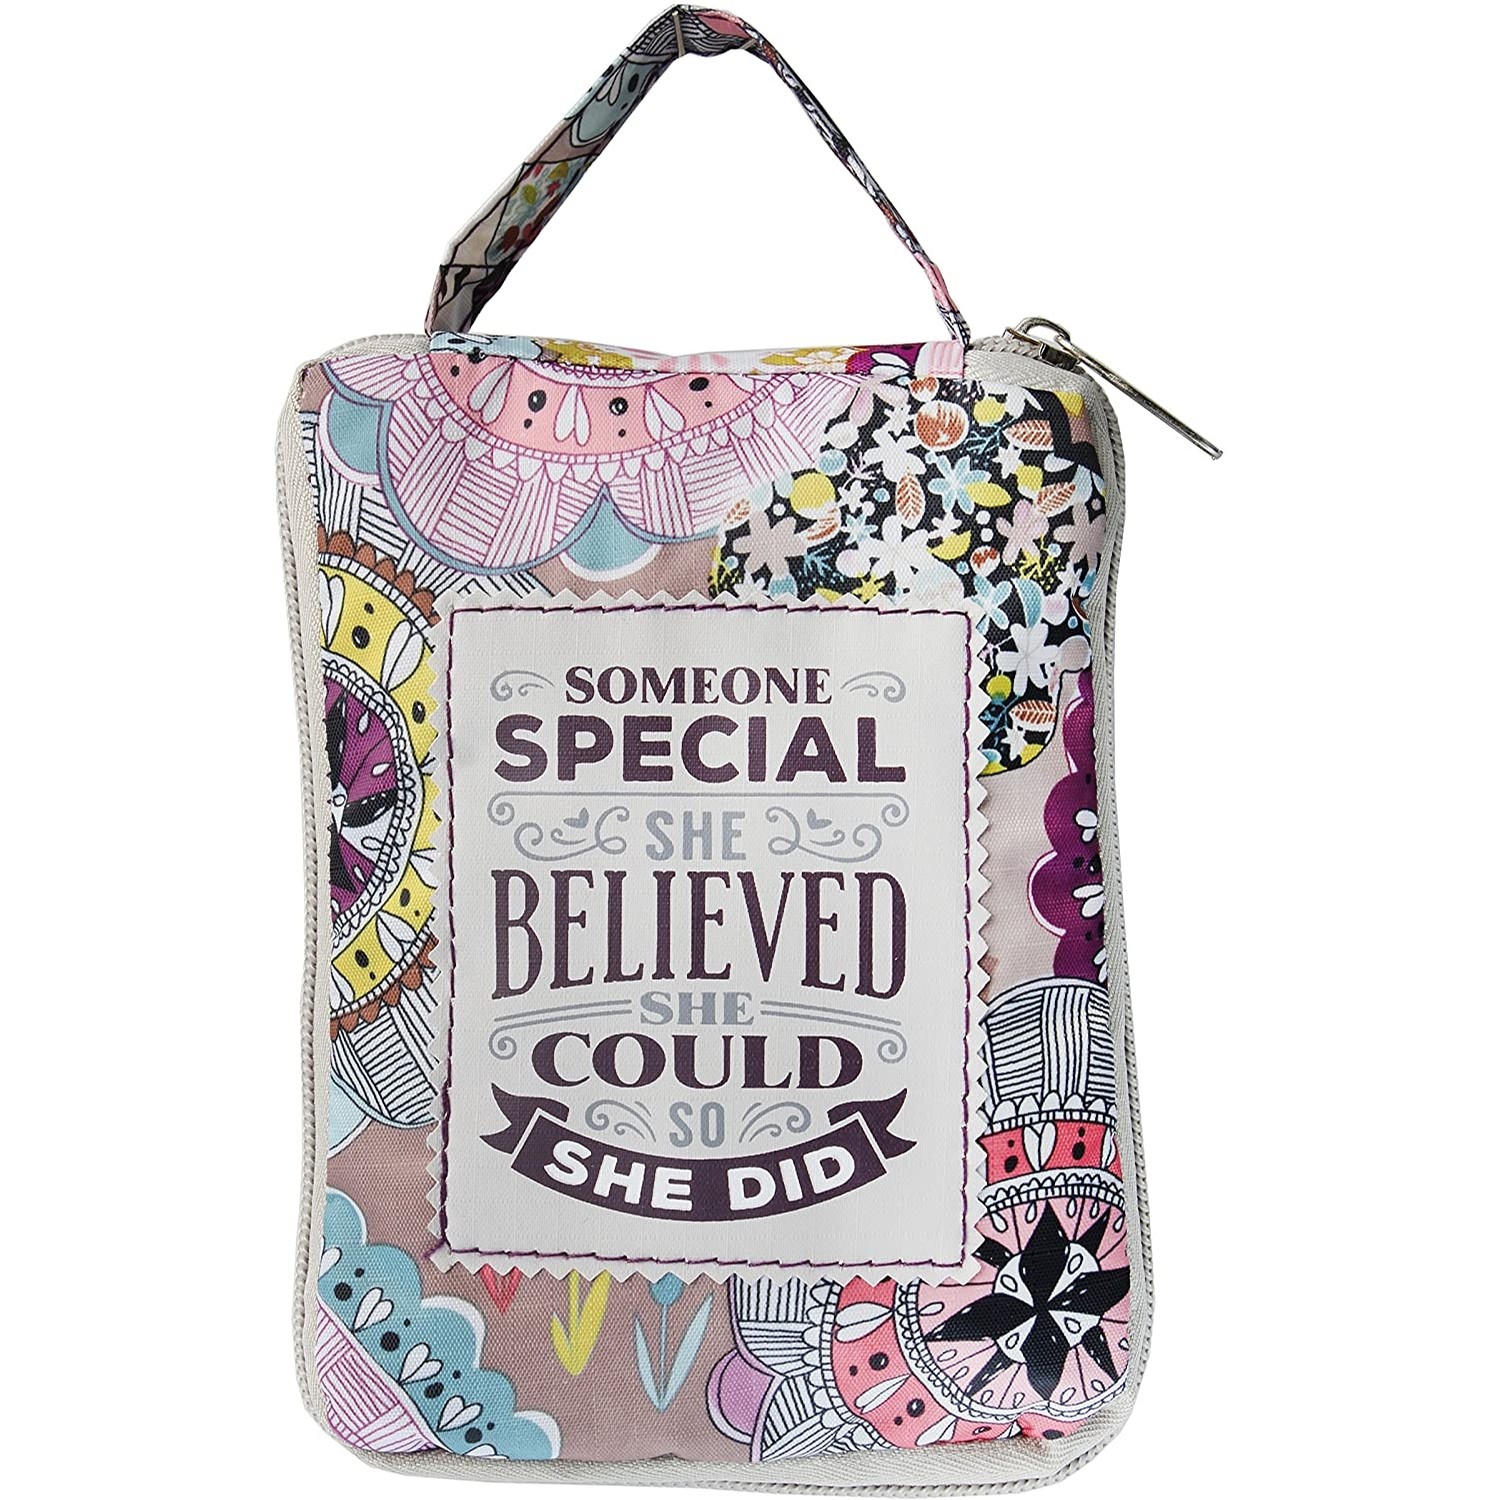 Fab Girl Bag (Someone Special)